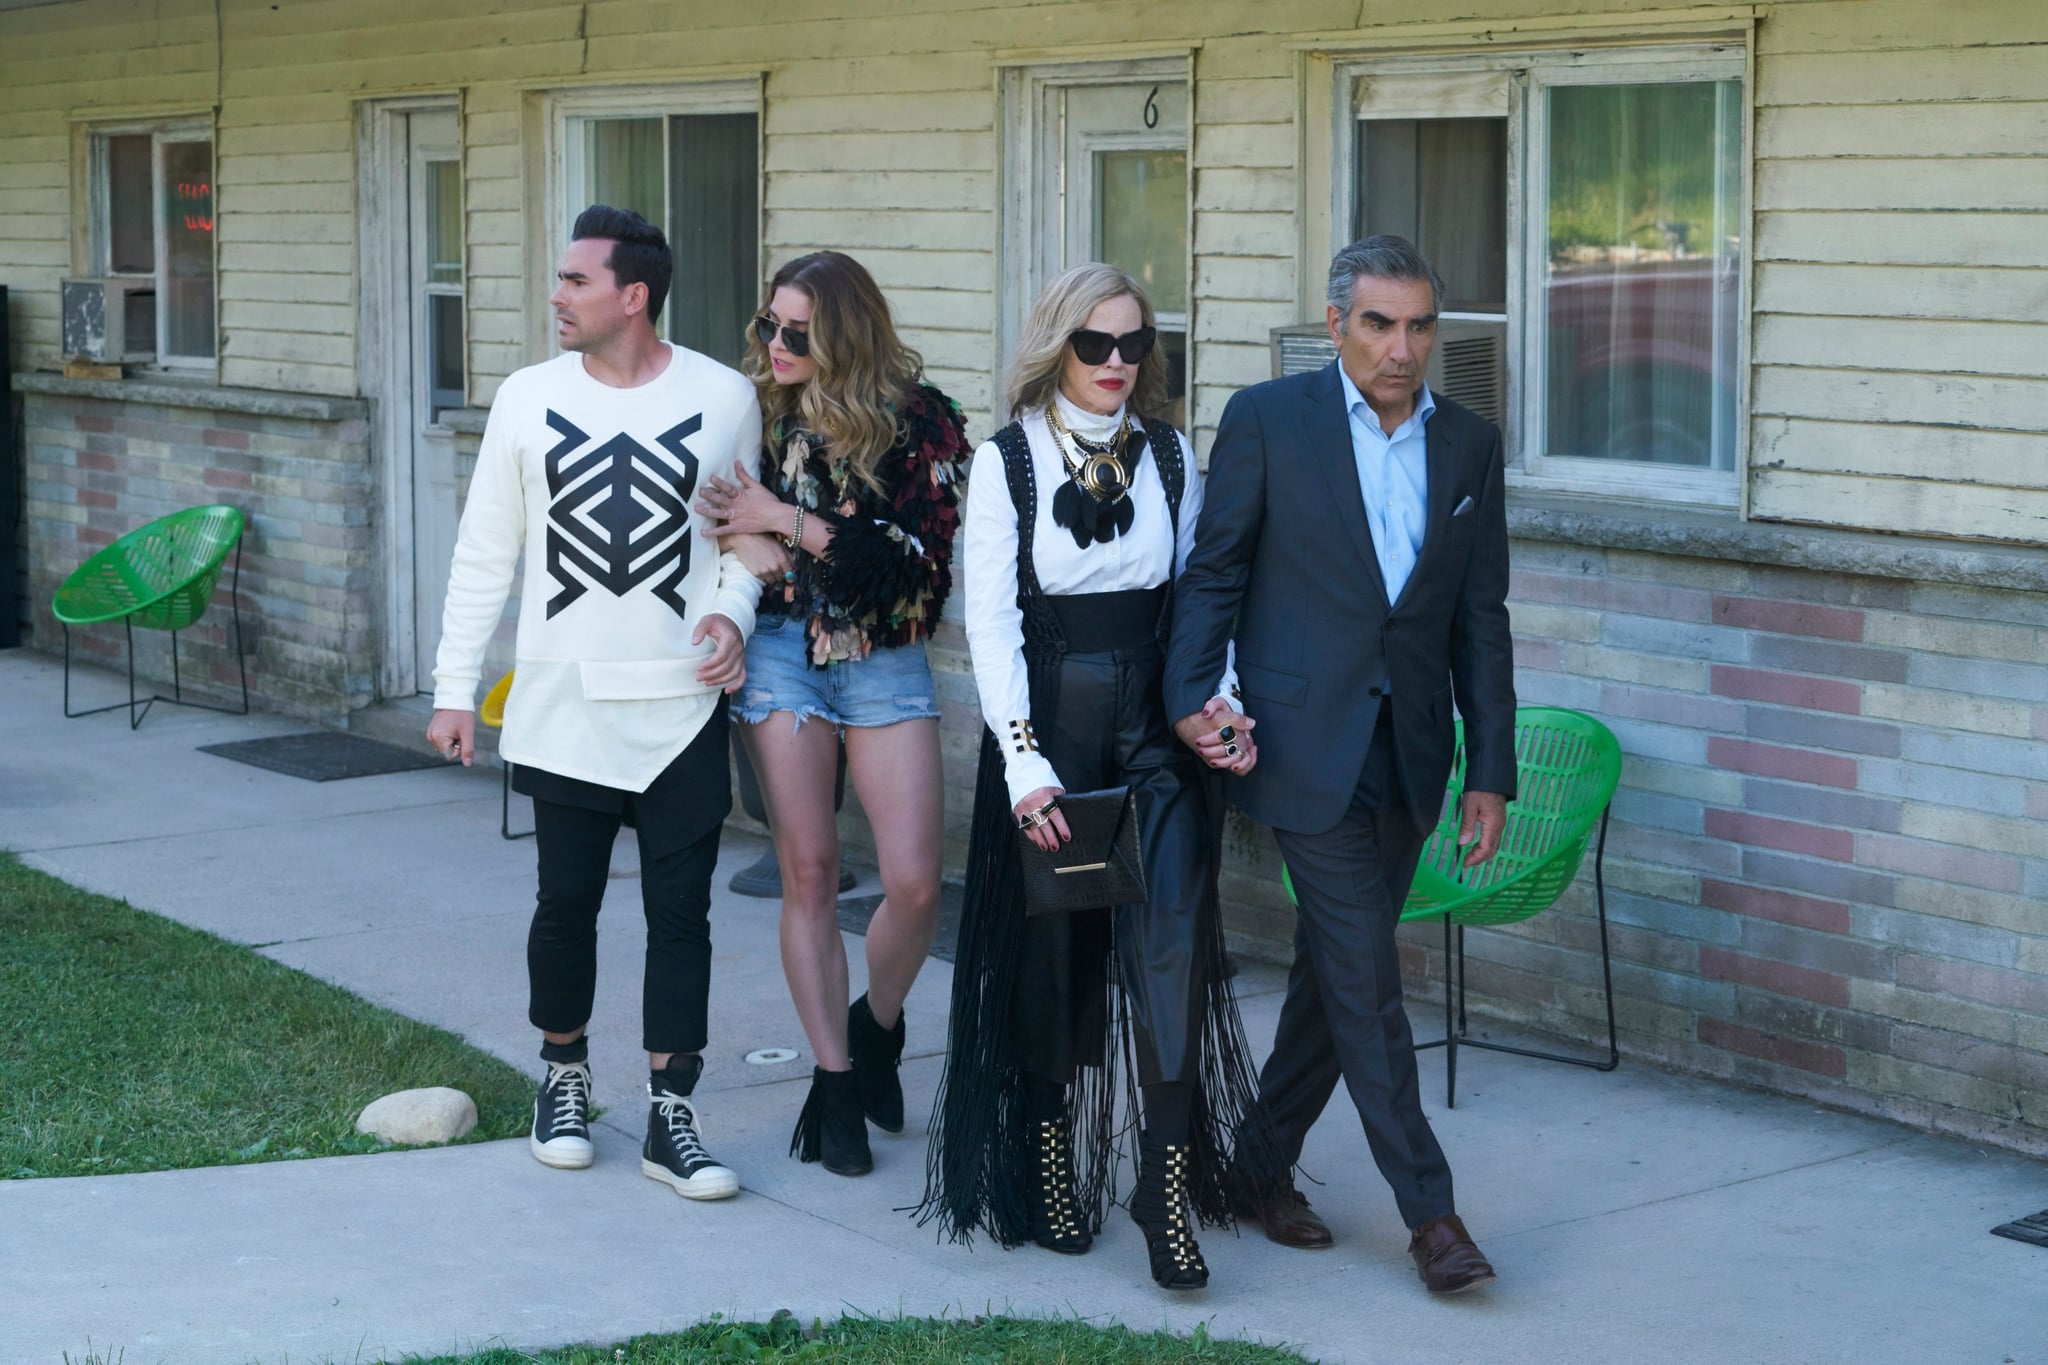 SCHITT'S CREEK, from left: Dan Levy, Annie Murphy, Catherine O'Hara, Eugene Levy, 'The Throuple', (Season 3, ep. 302, originally aired in the US on Jan. 18, 2017). photo: CBC/POP / courtesy Everett Collection